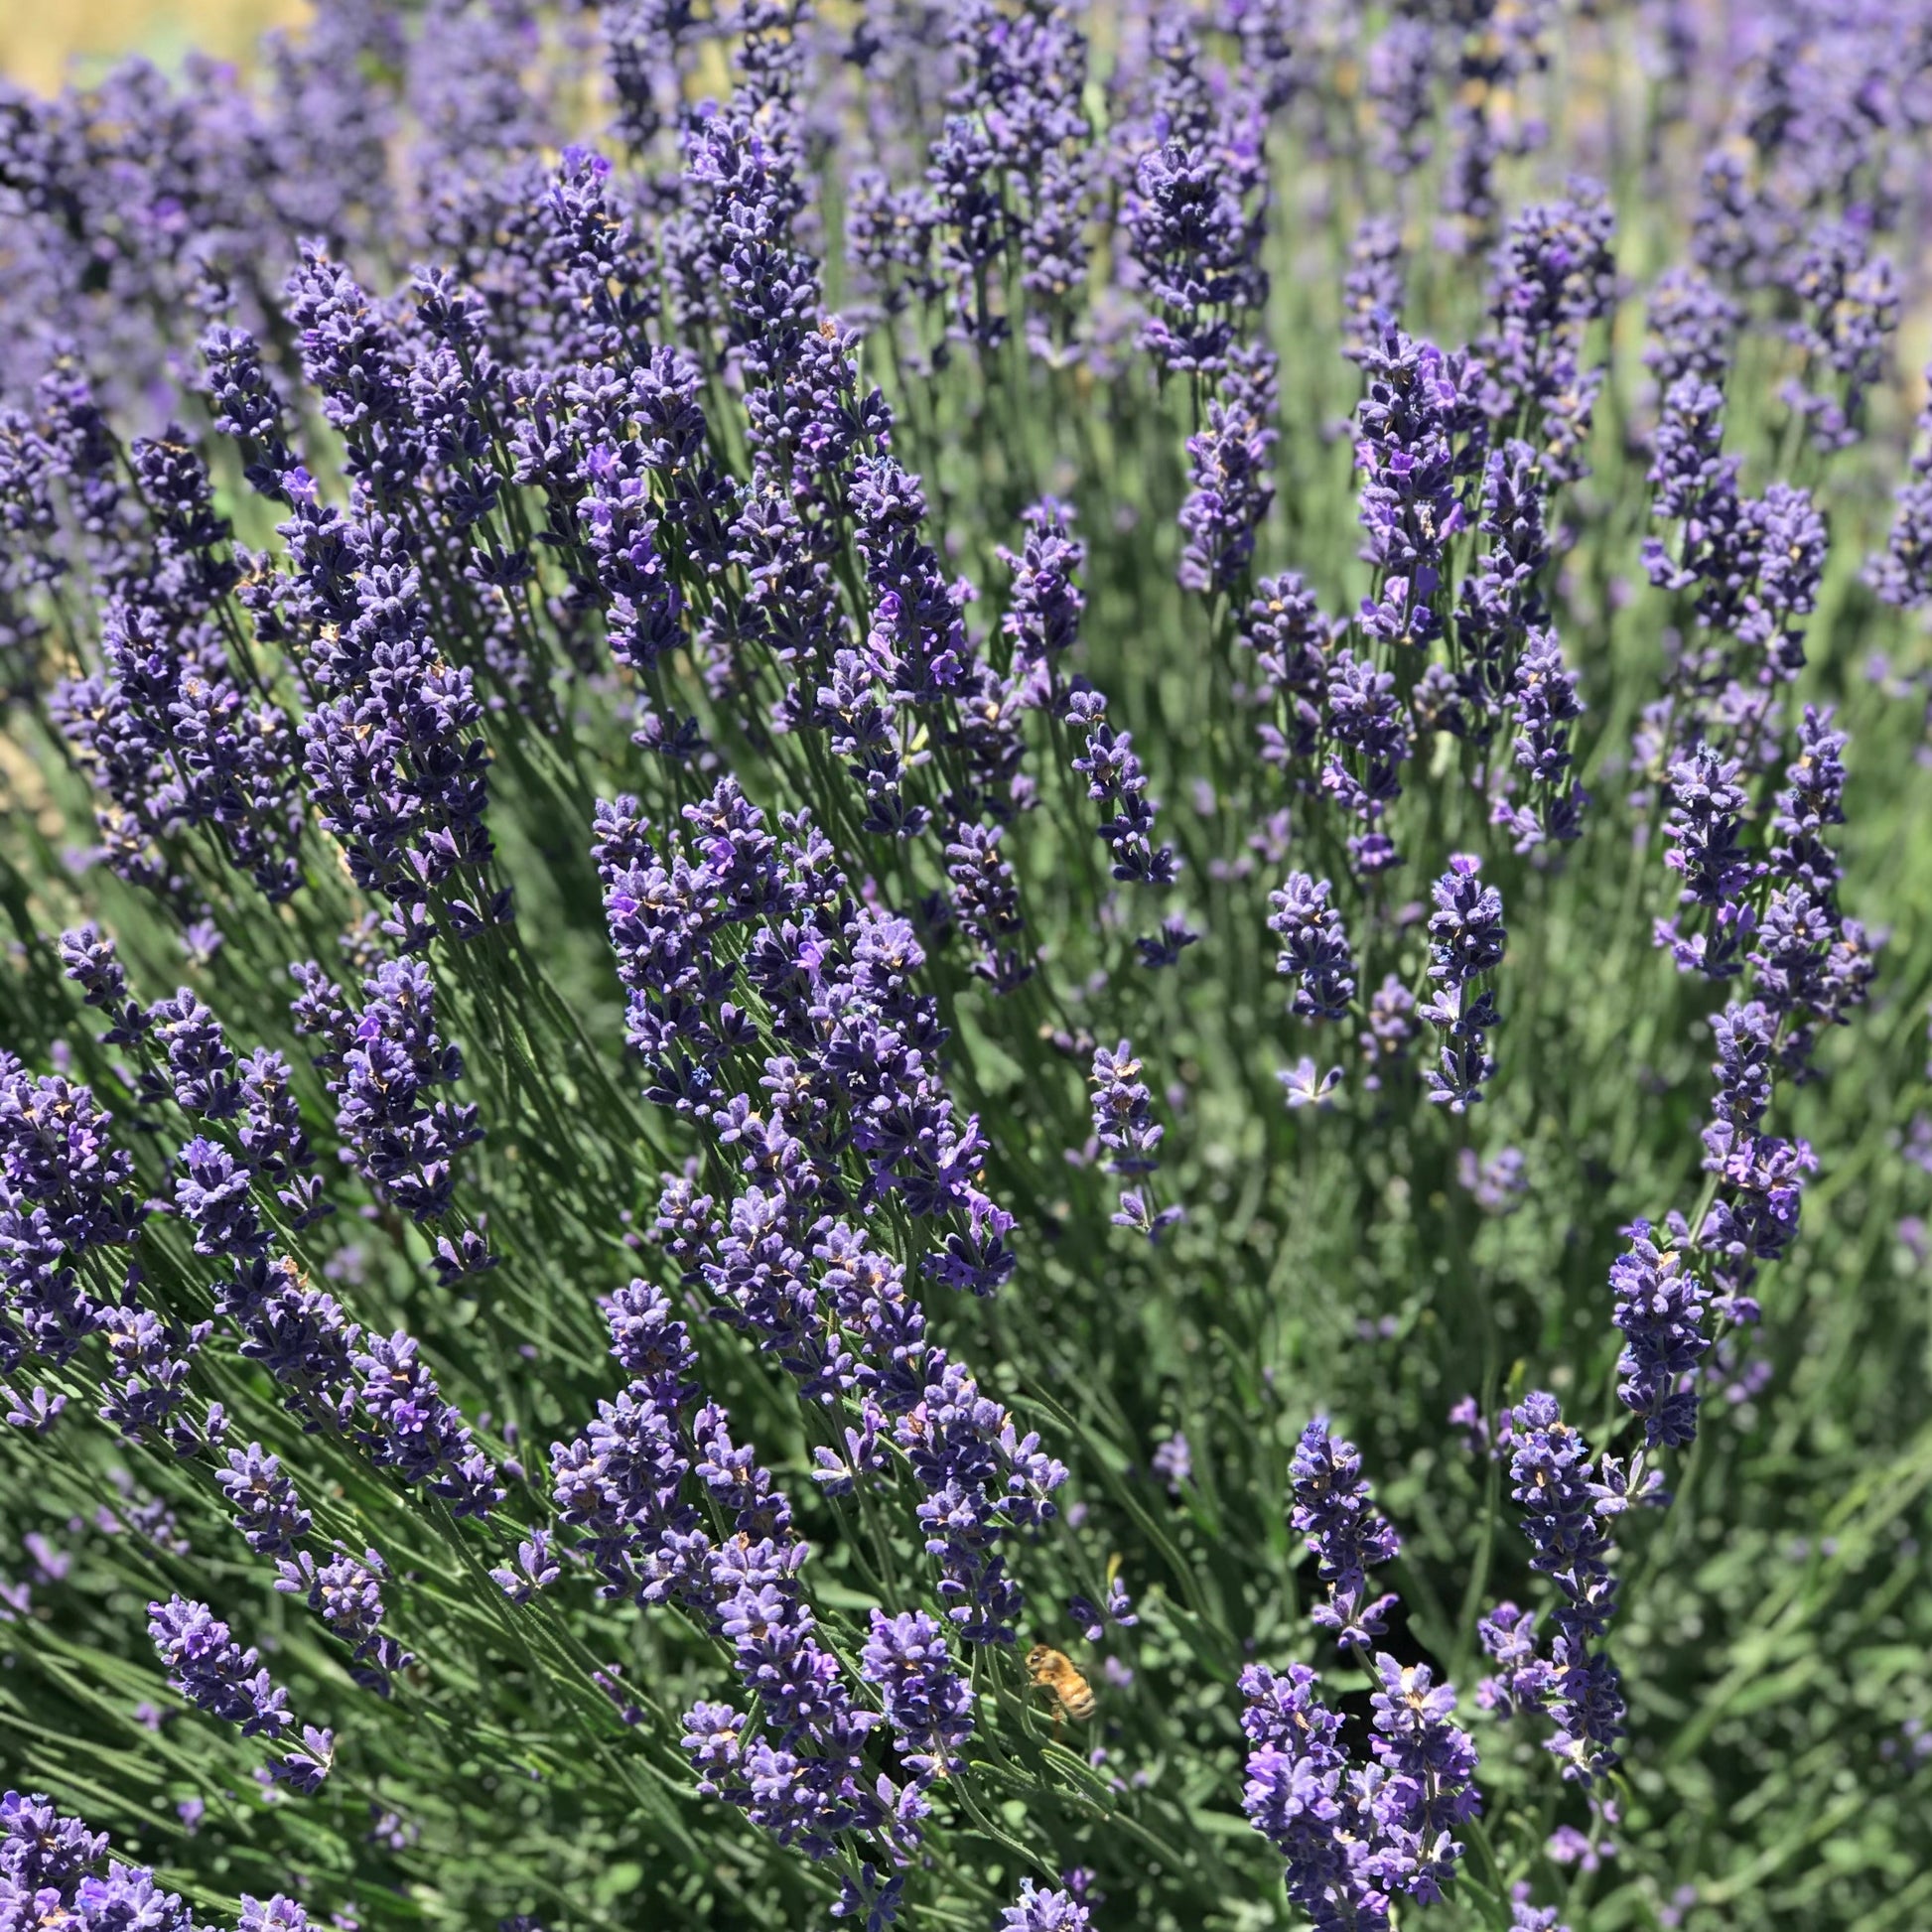 This is a photo taken outdoors on a sunny day of a lavender plant. The lavender flowers are a vibrant purple.